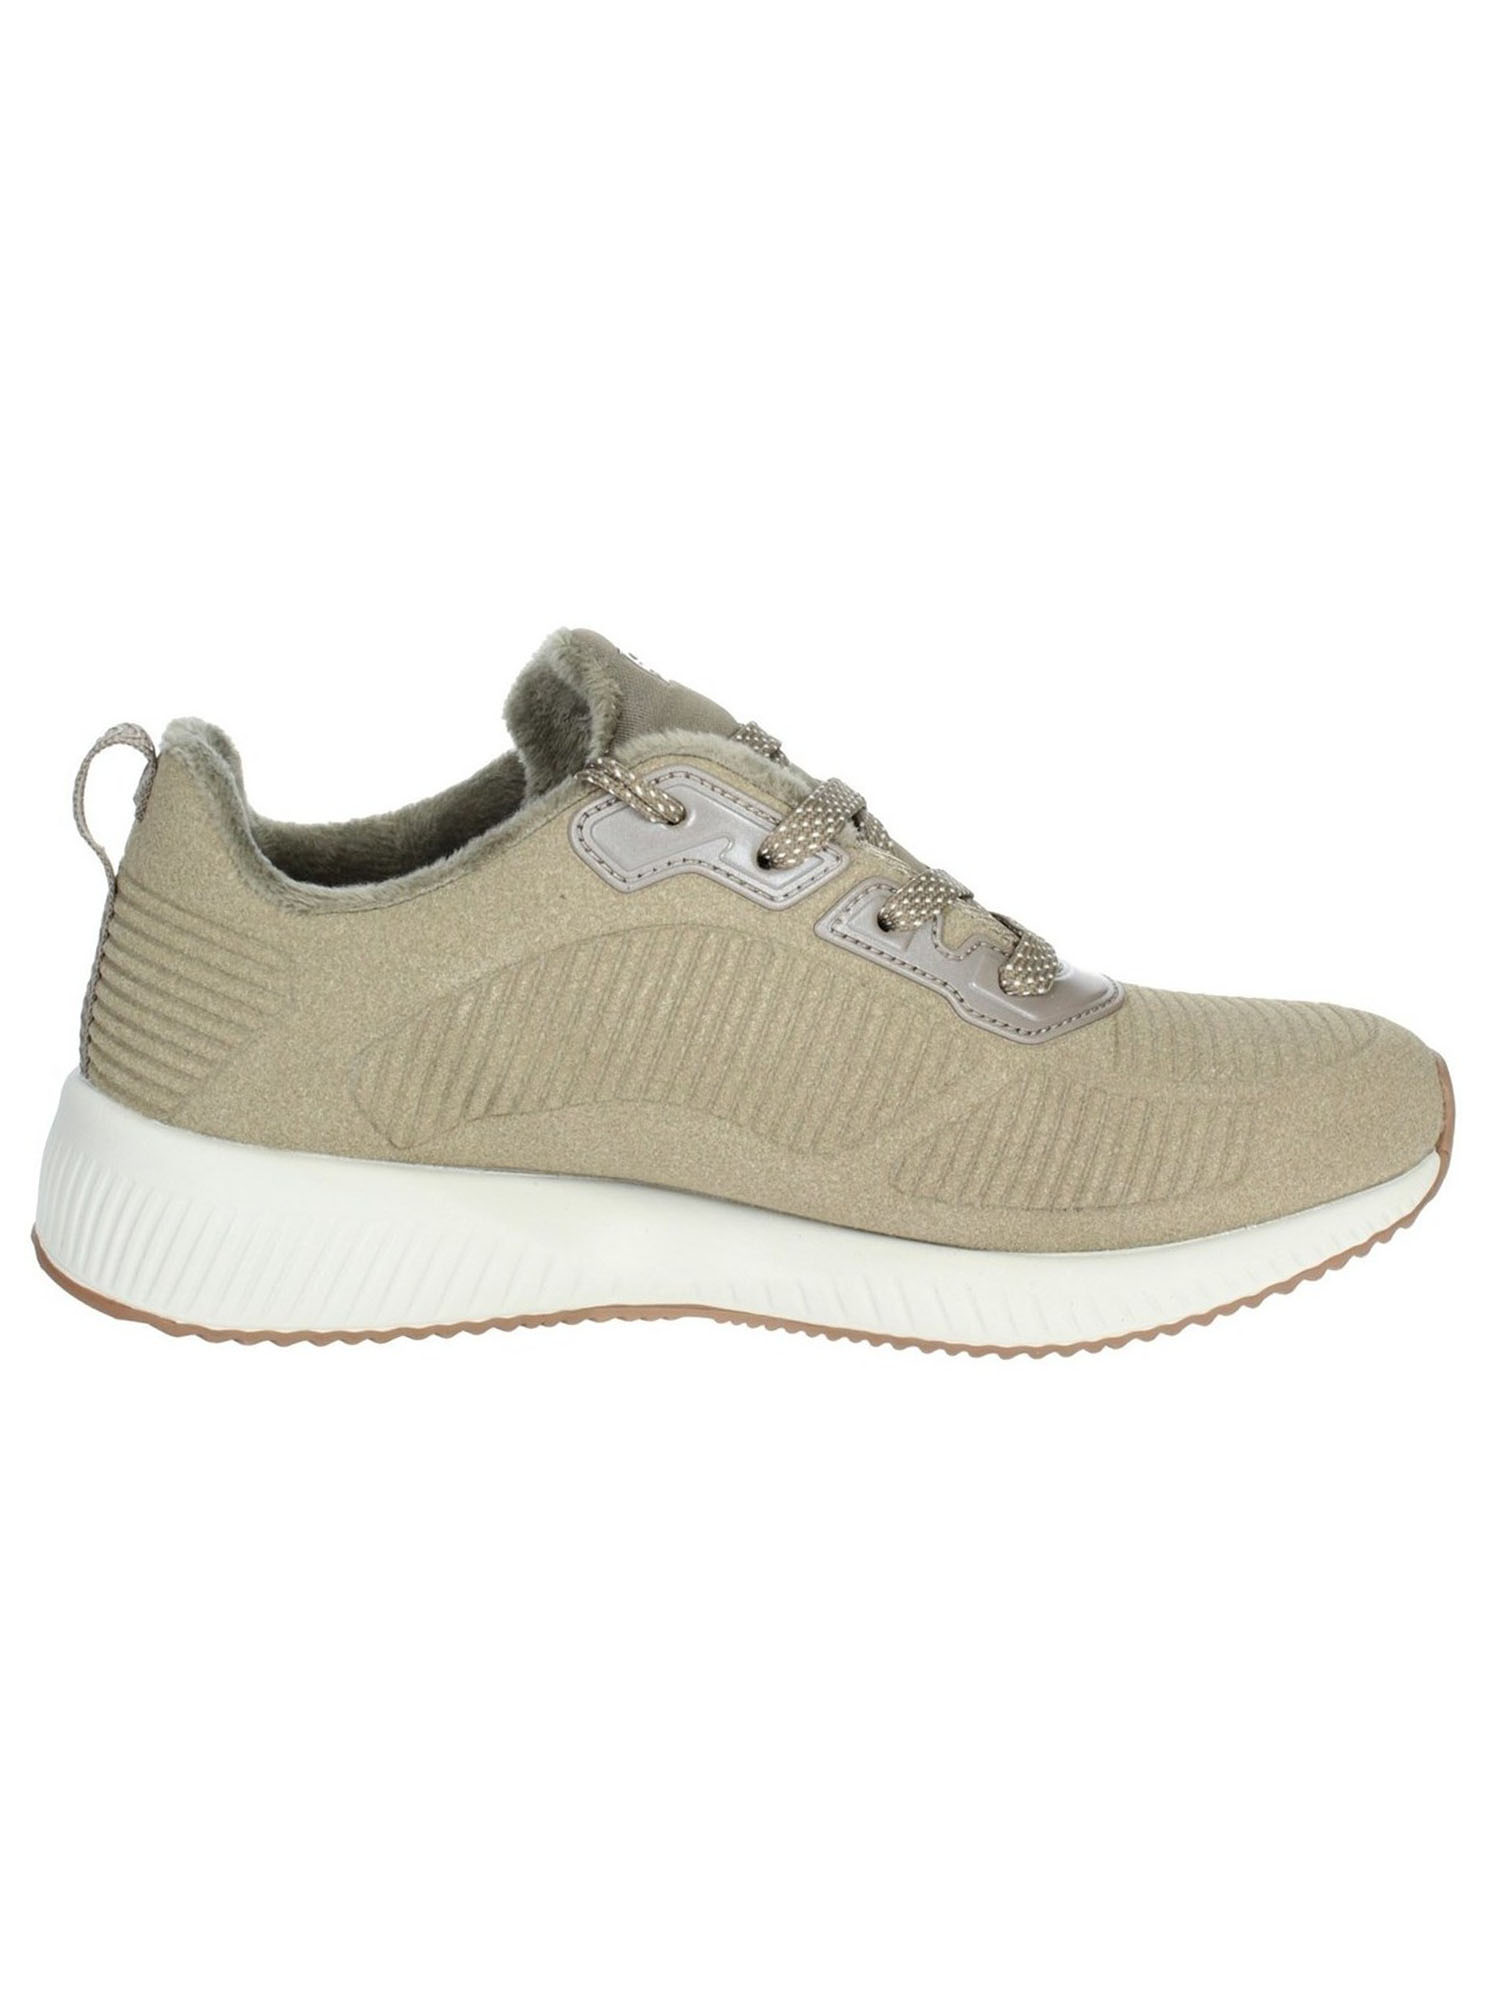 SKECHERS BOBS SPORT - TAUPE